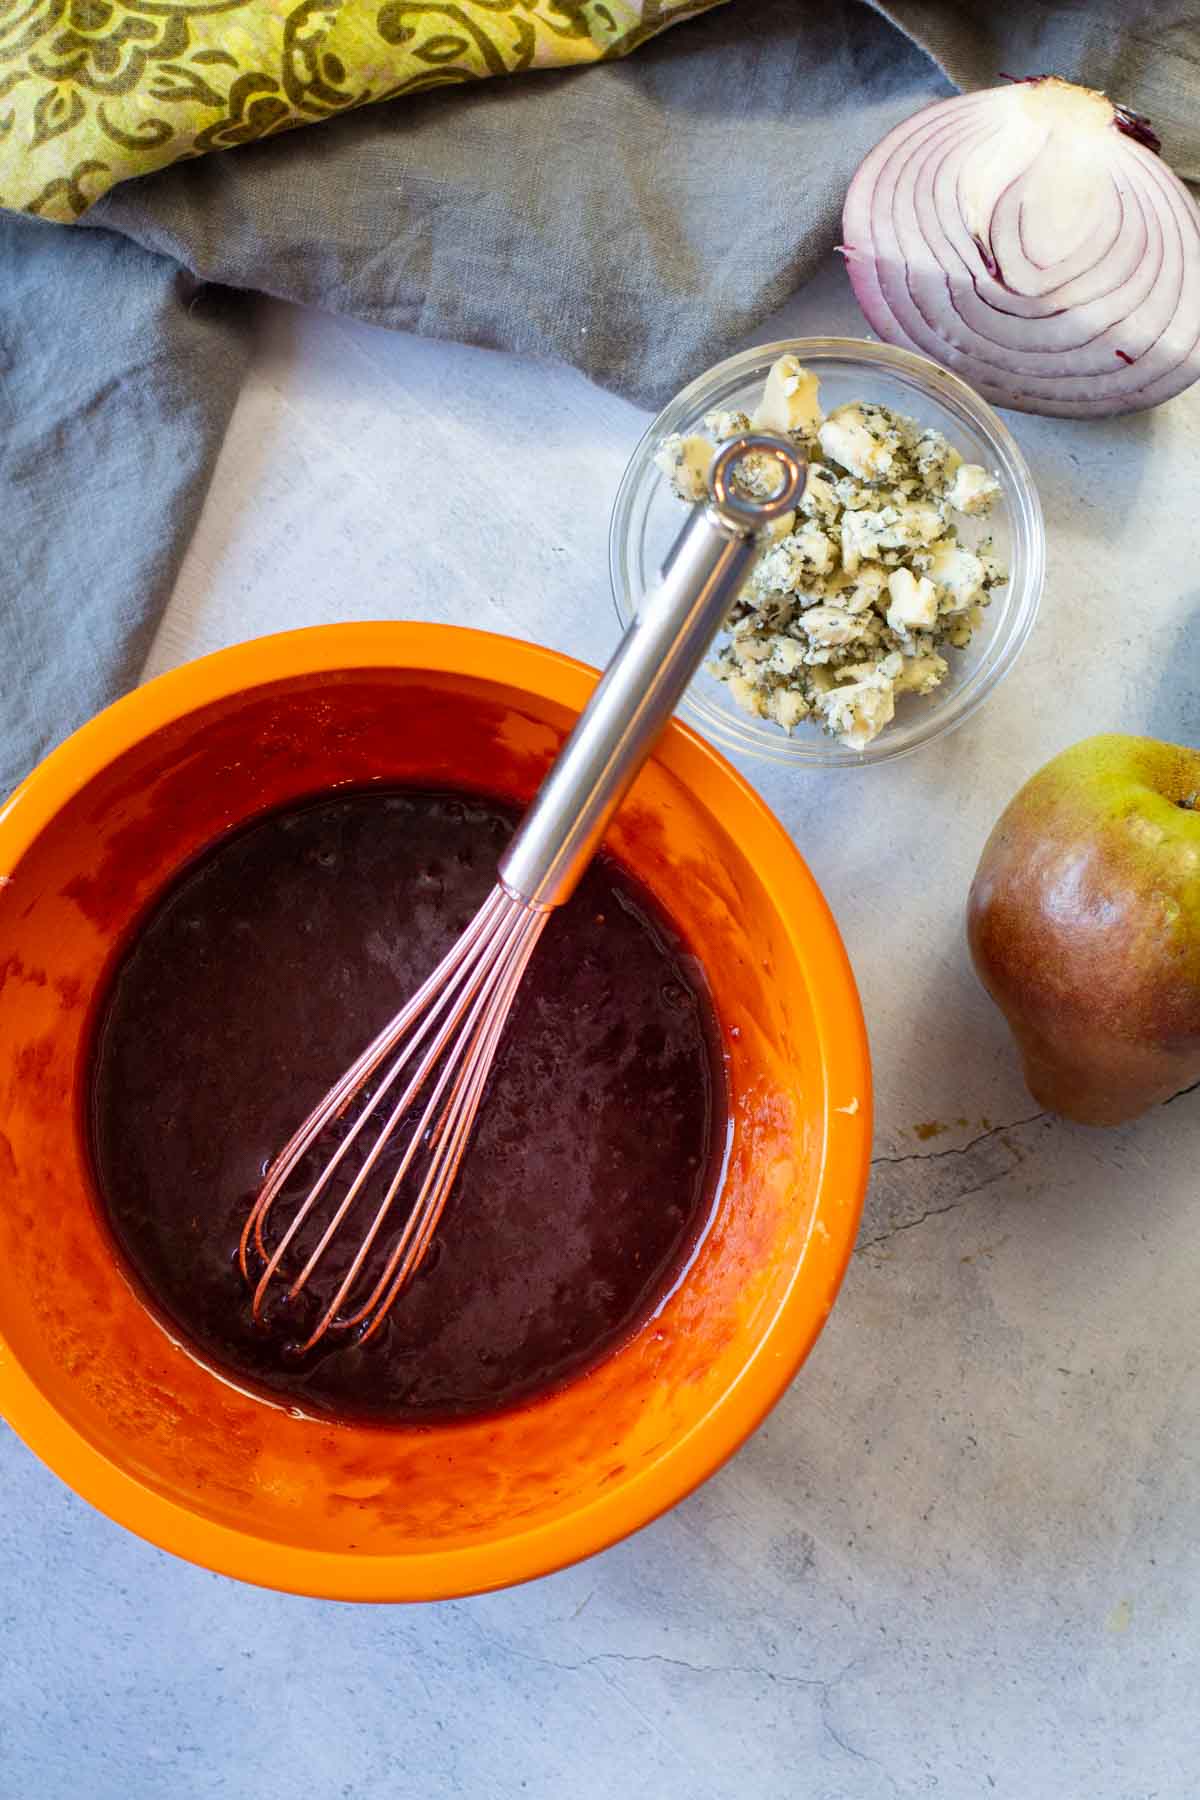 Using a whisk to blend ingredients together to make cranberry vinaigrette.